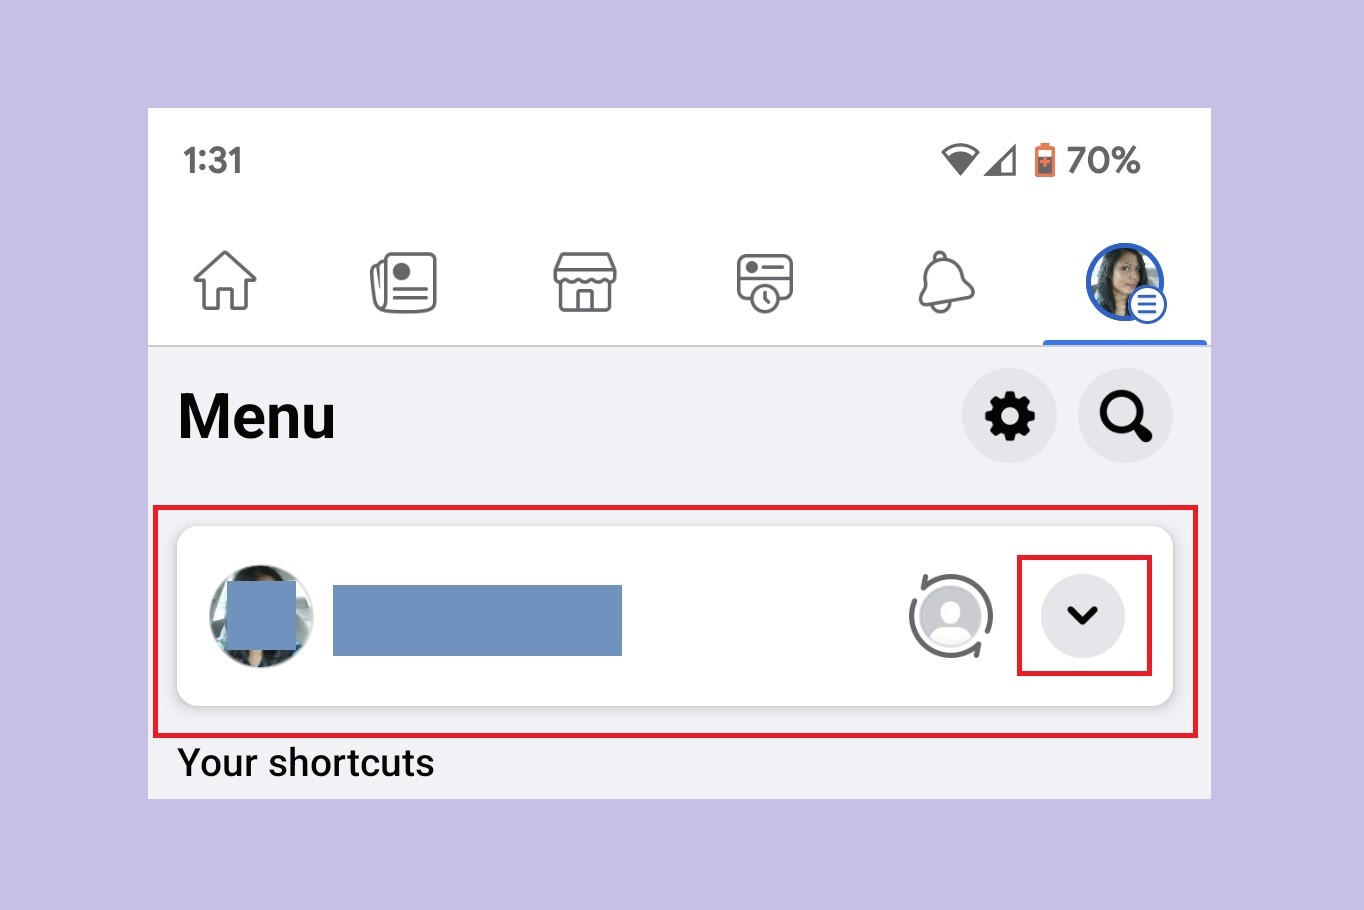 ⭕How to enter a friend's account on Facebook 2020⭕ 